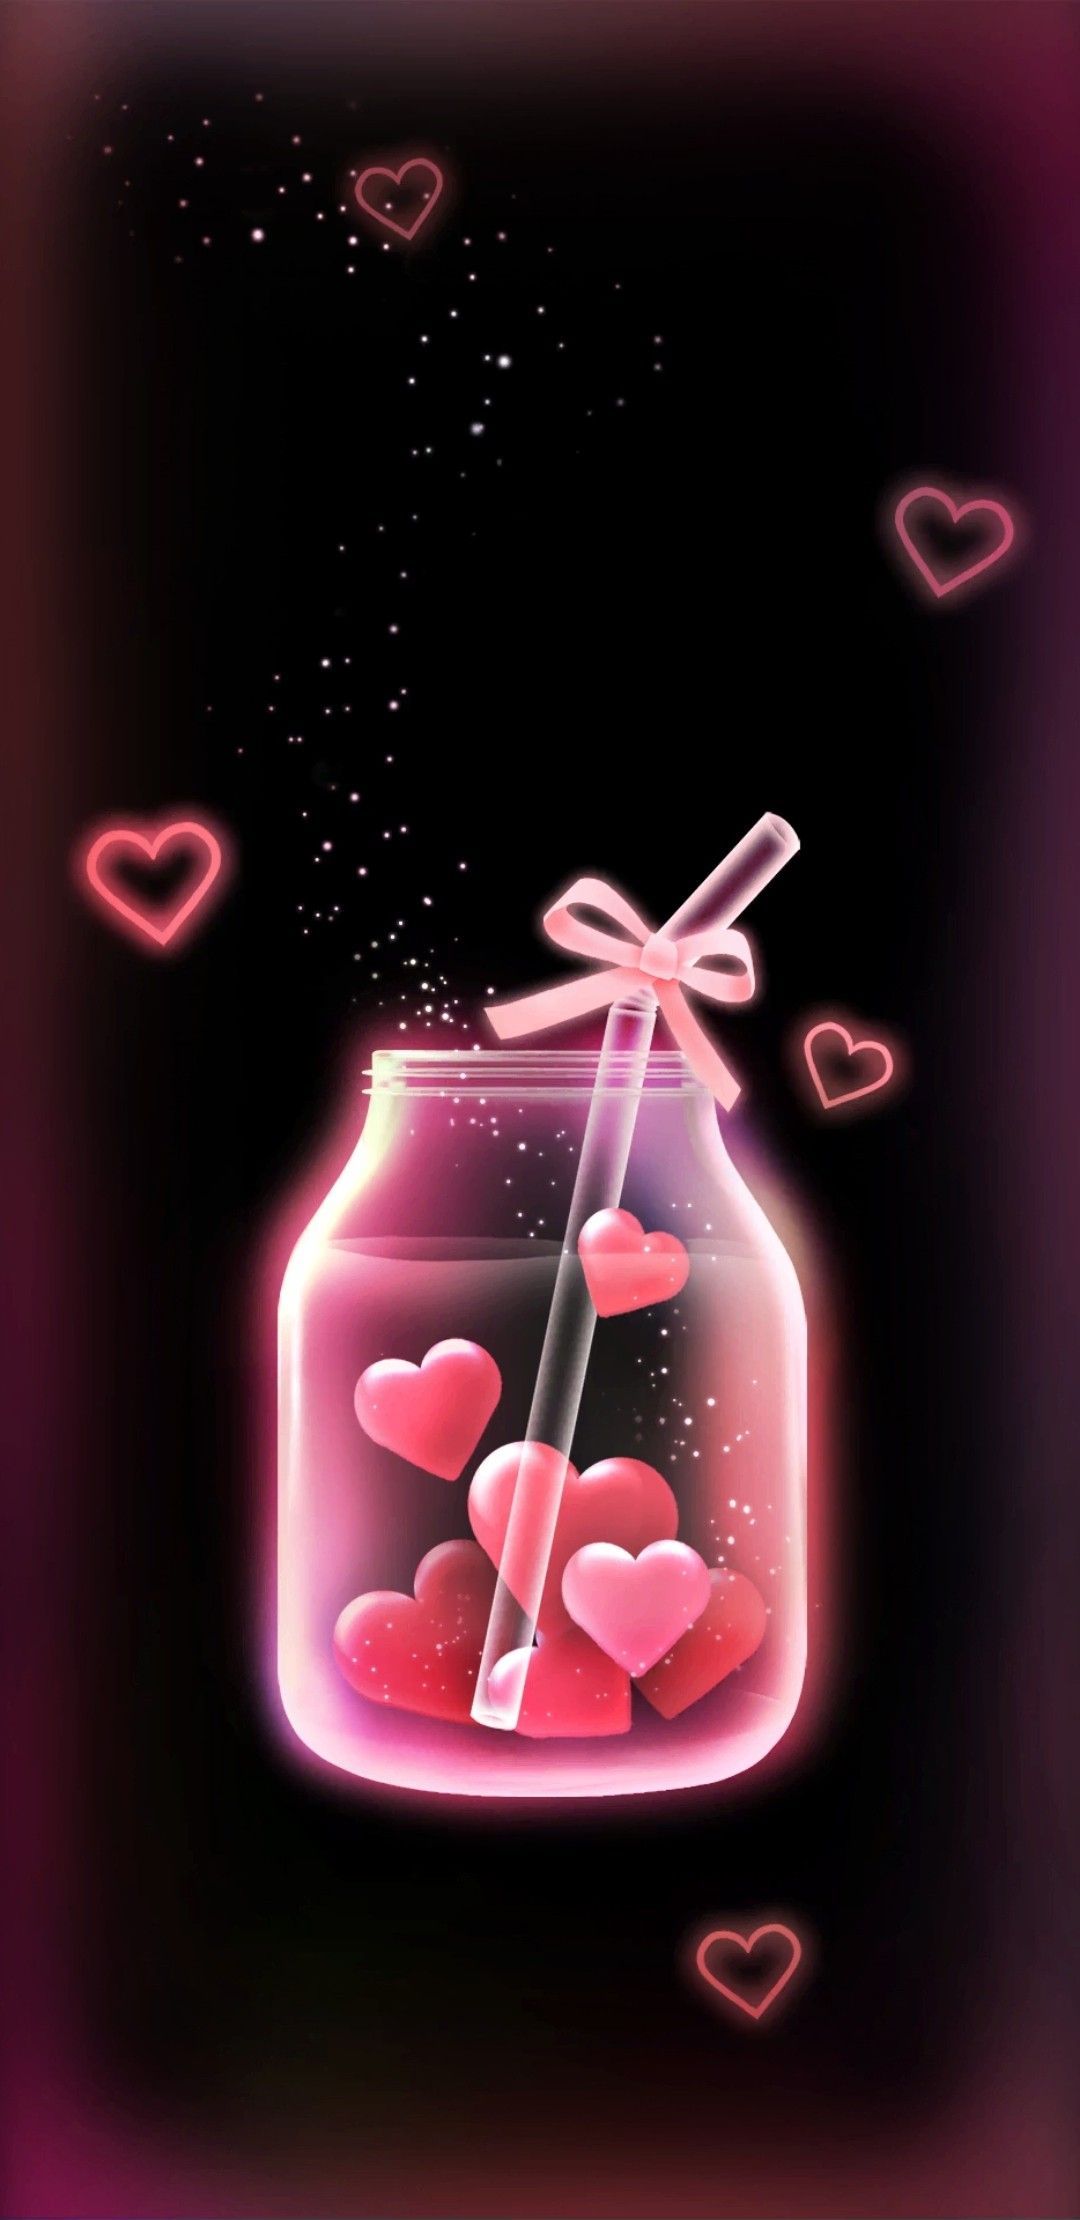 Valentines Day Wallpaper For iPhone Best Valentines Day Wallpaper iPhone Wallpaper & Background Download